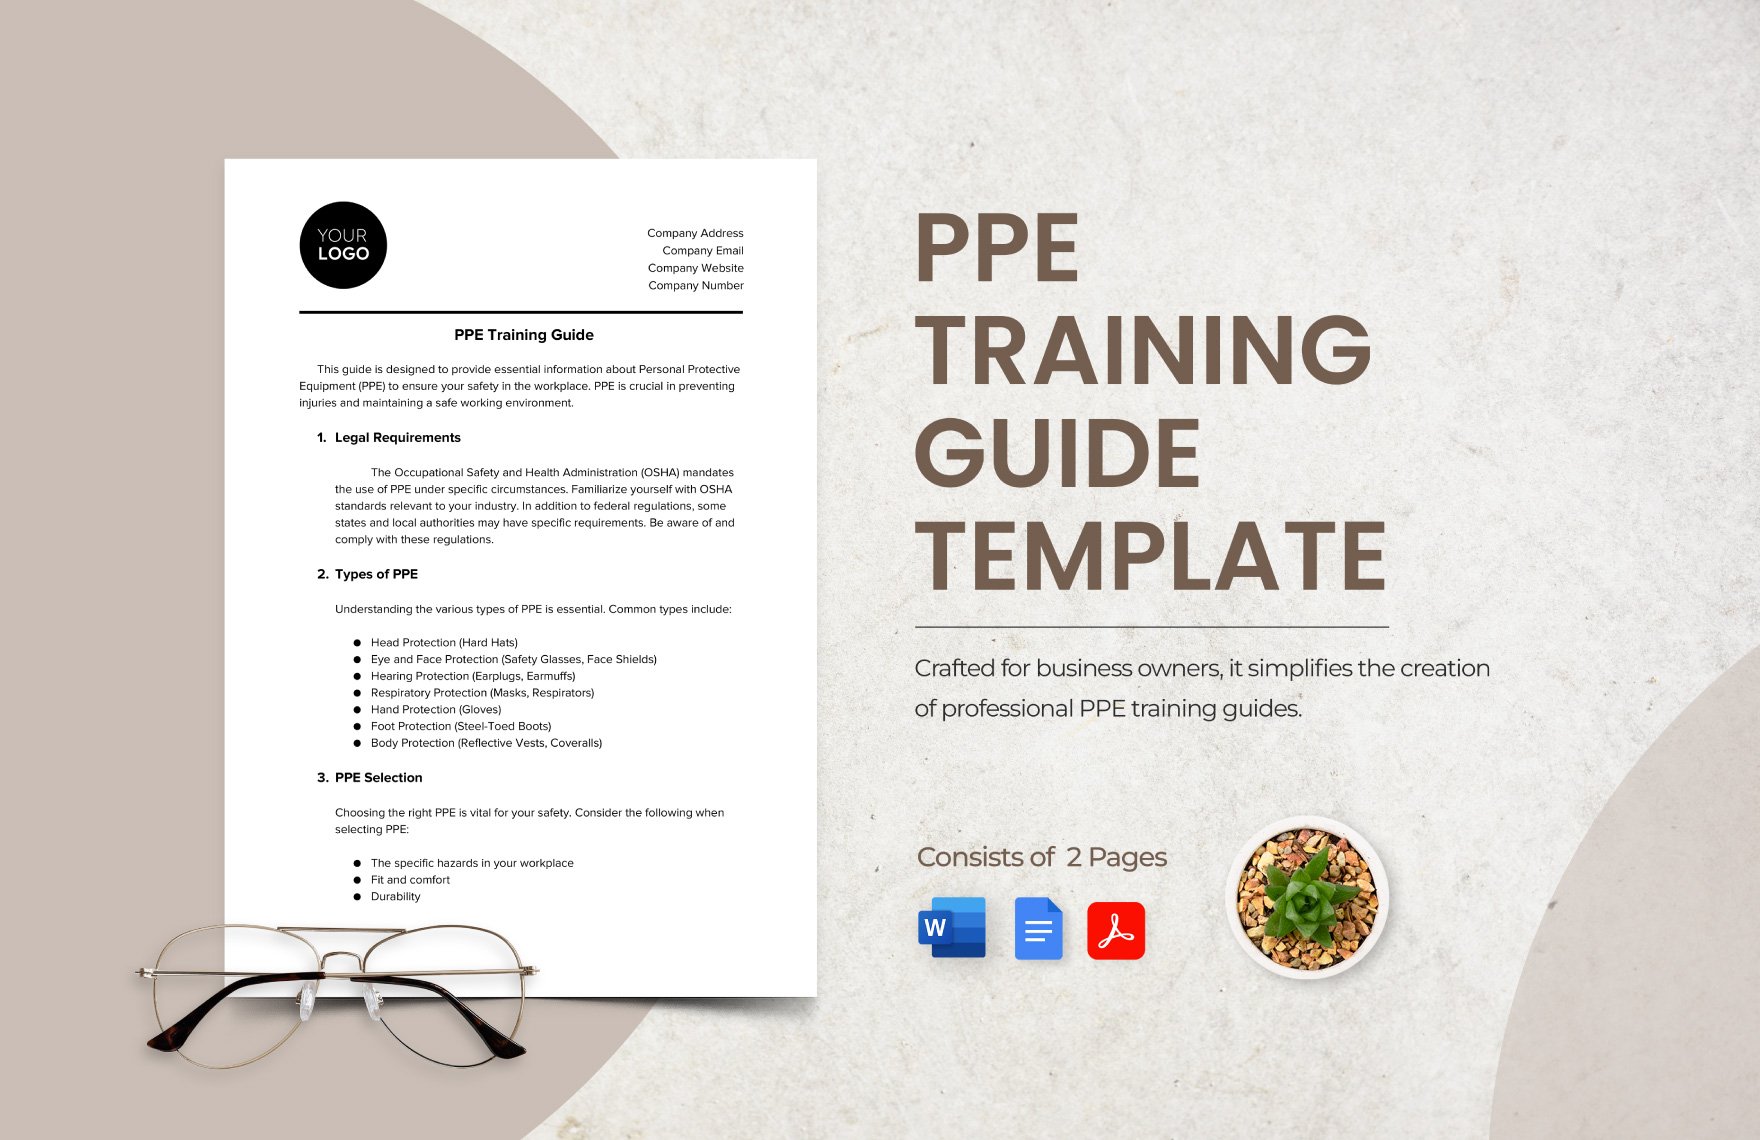 PPE Training Guide Template